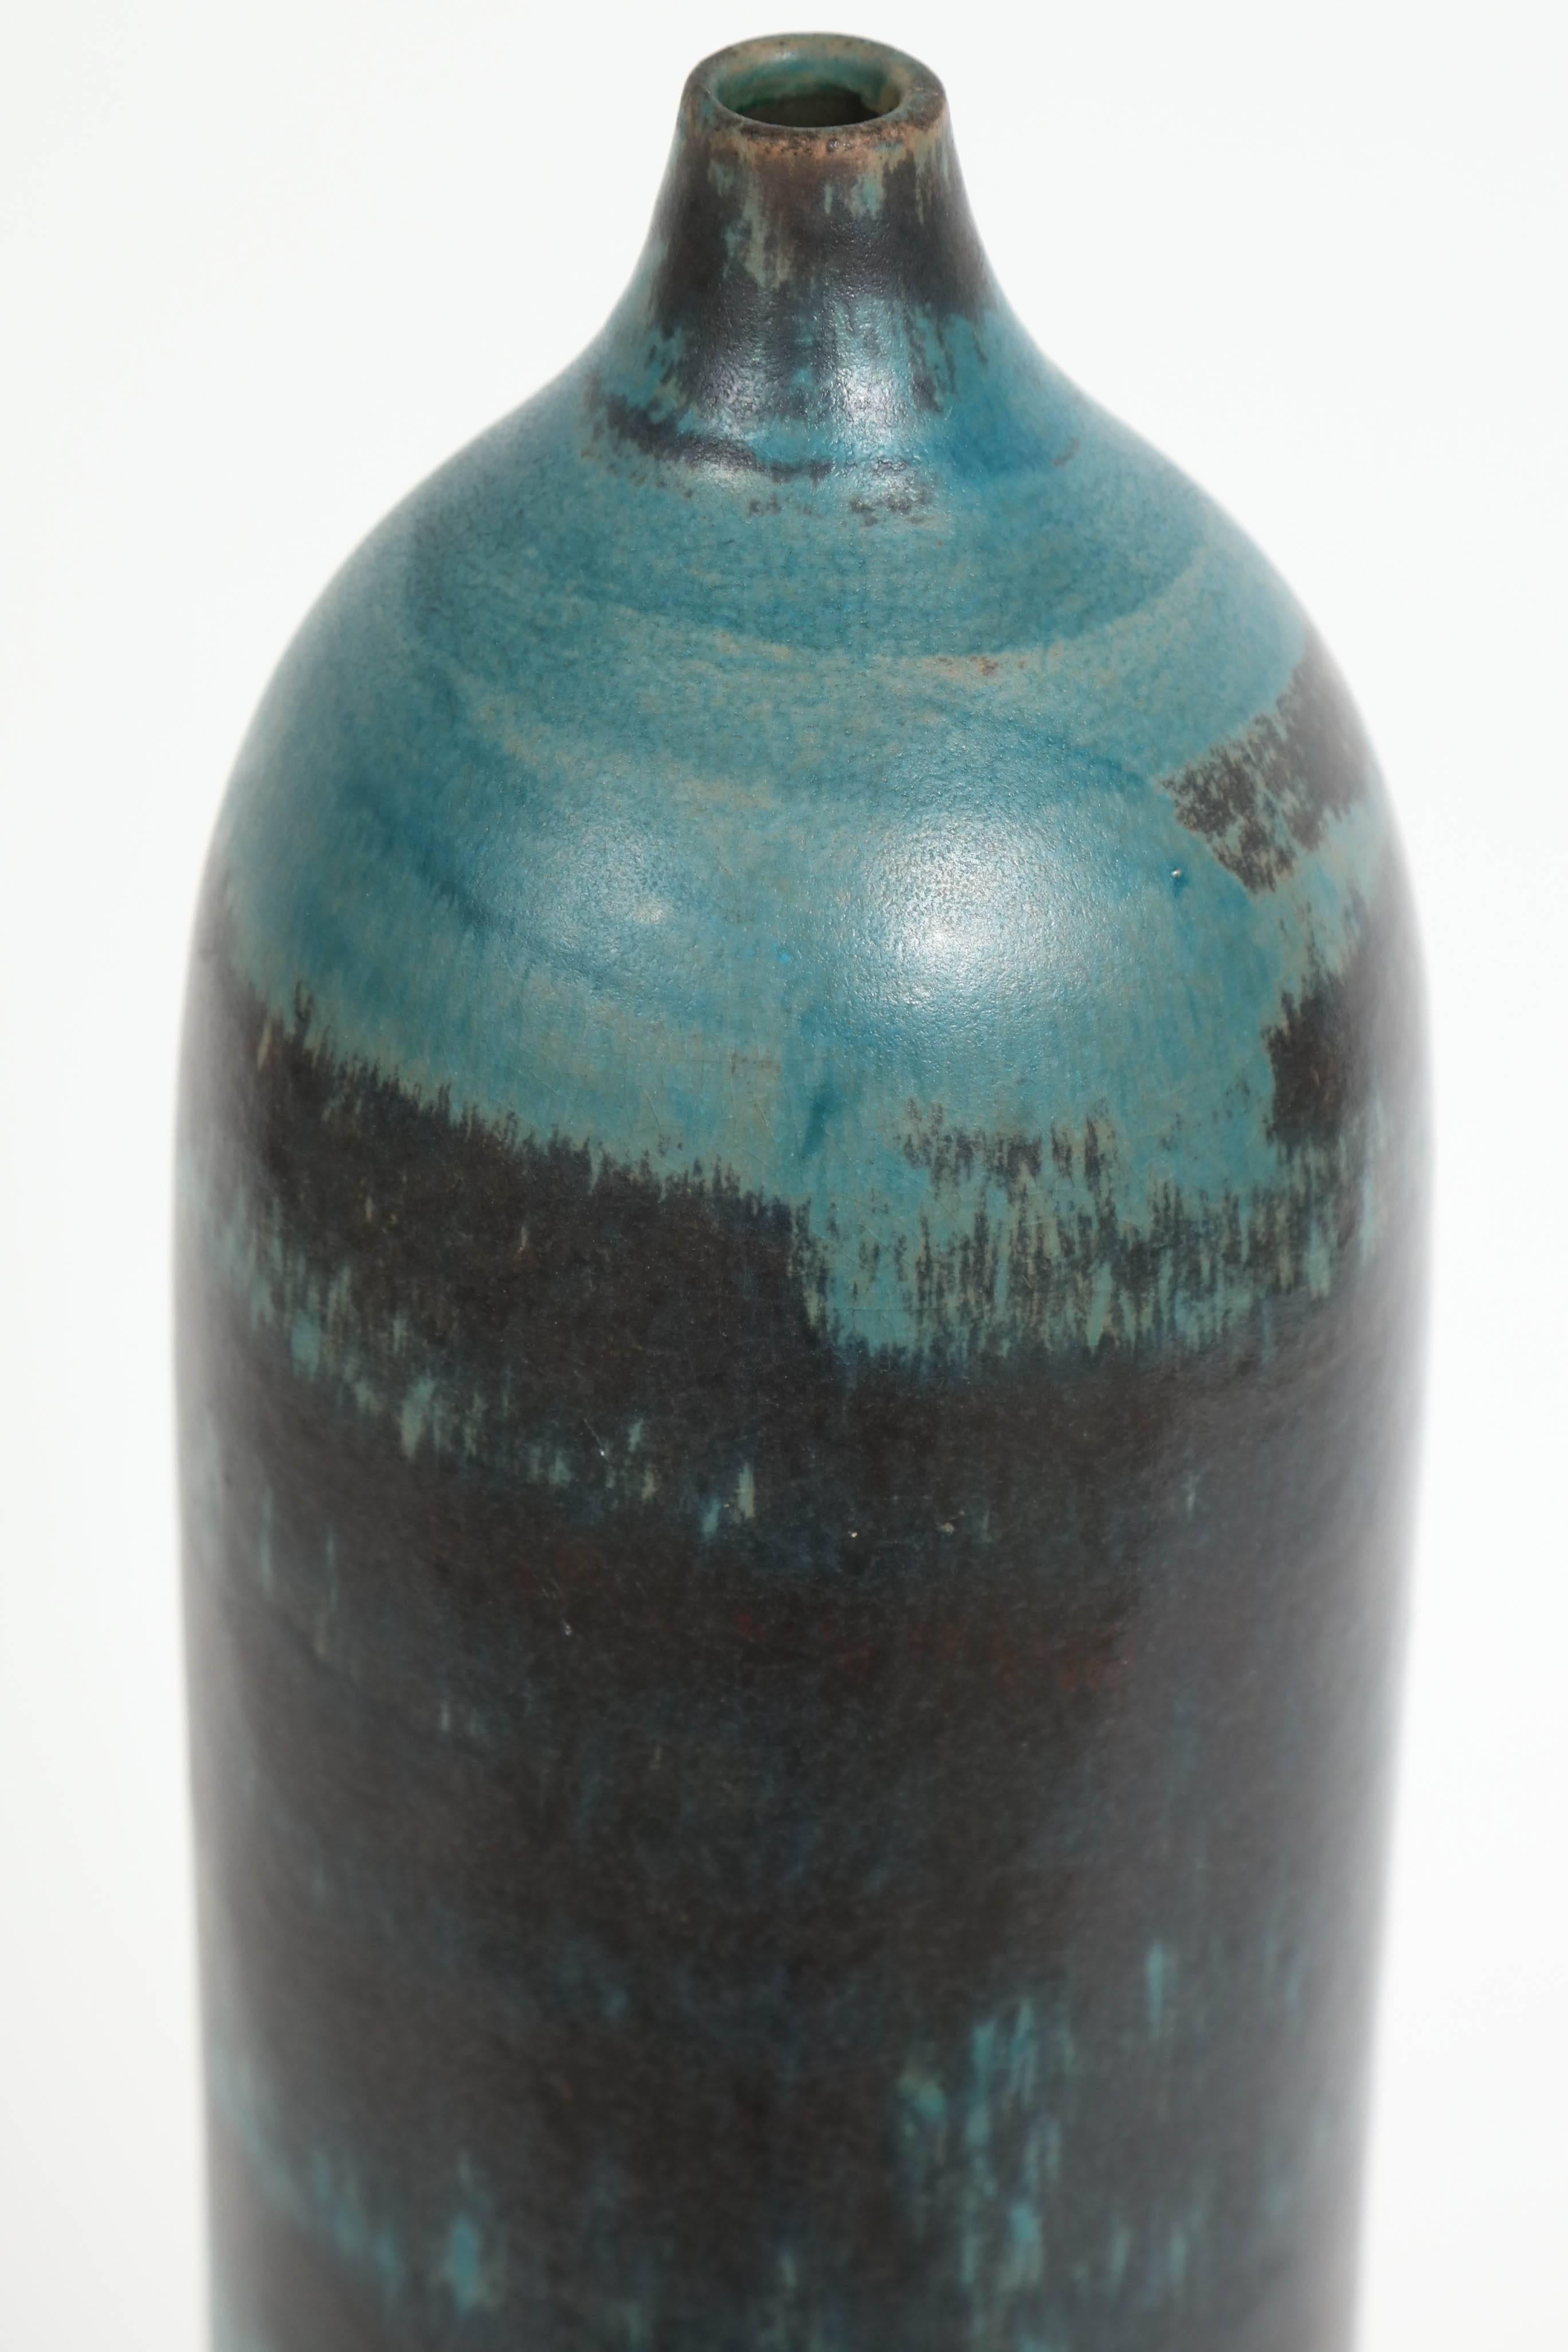 Italian artist Marcello Fantoni cylindrical ceramic bottle vase is glazed stoneware made circa 1960s. This piece was acquired directly from the artist by the seller, who was a personal friend of Marcello Fantoni. Glazed signature to underside: